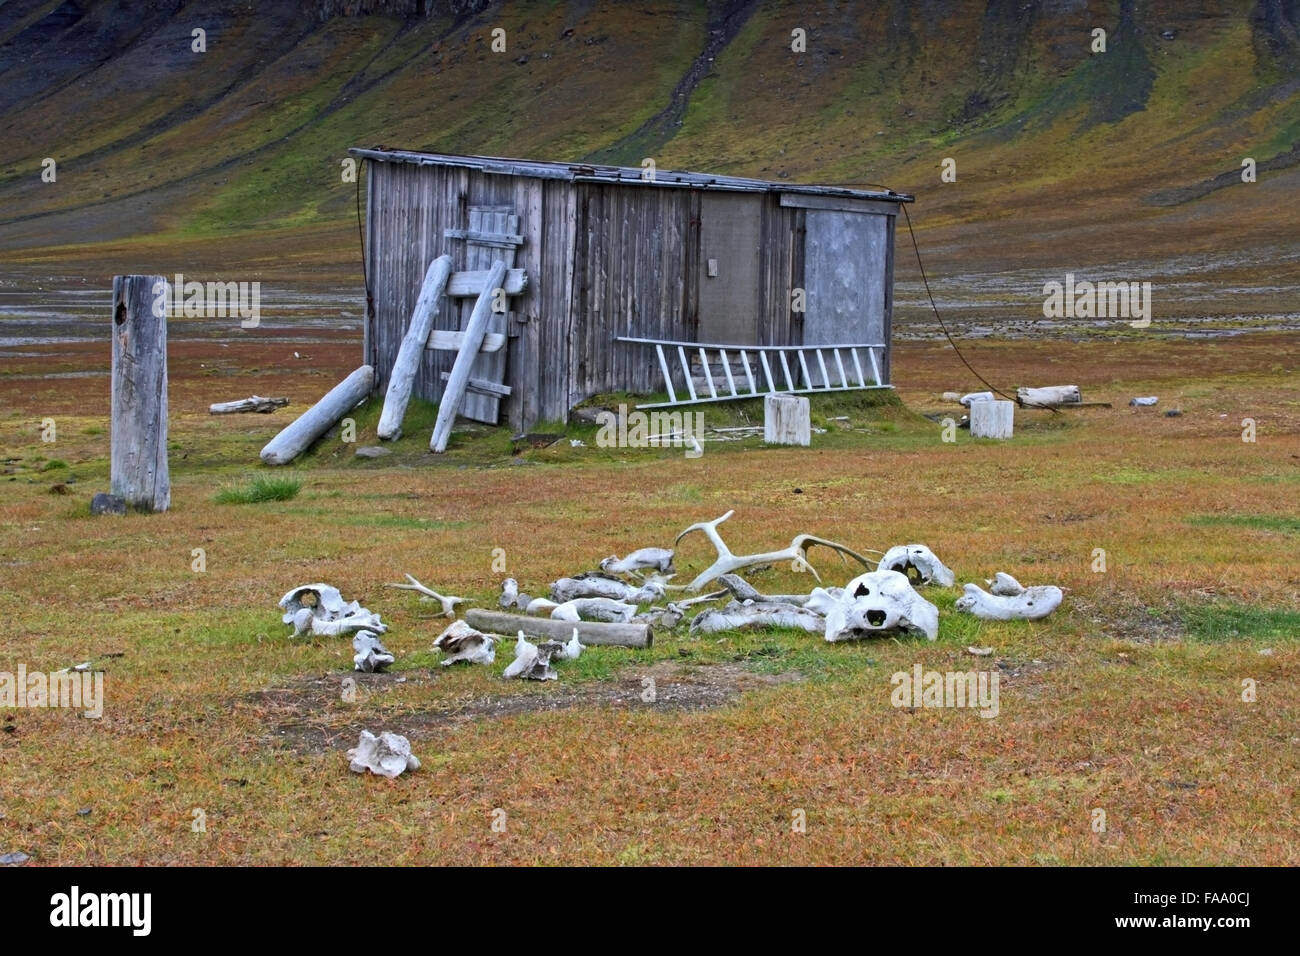 Remnants of the trapping industry outside a trapper's cabin, Spitsbergen, Svalbard Stock Photo